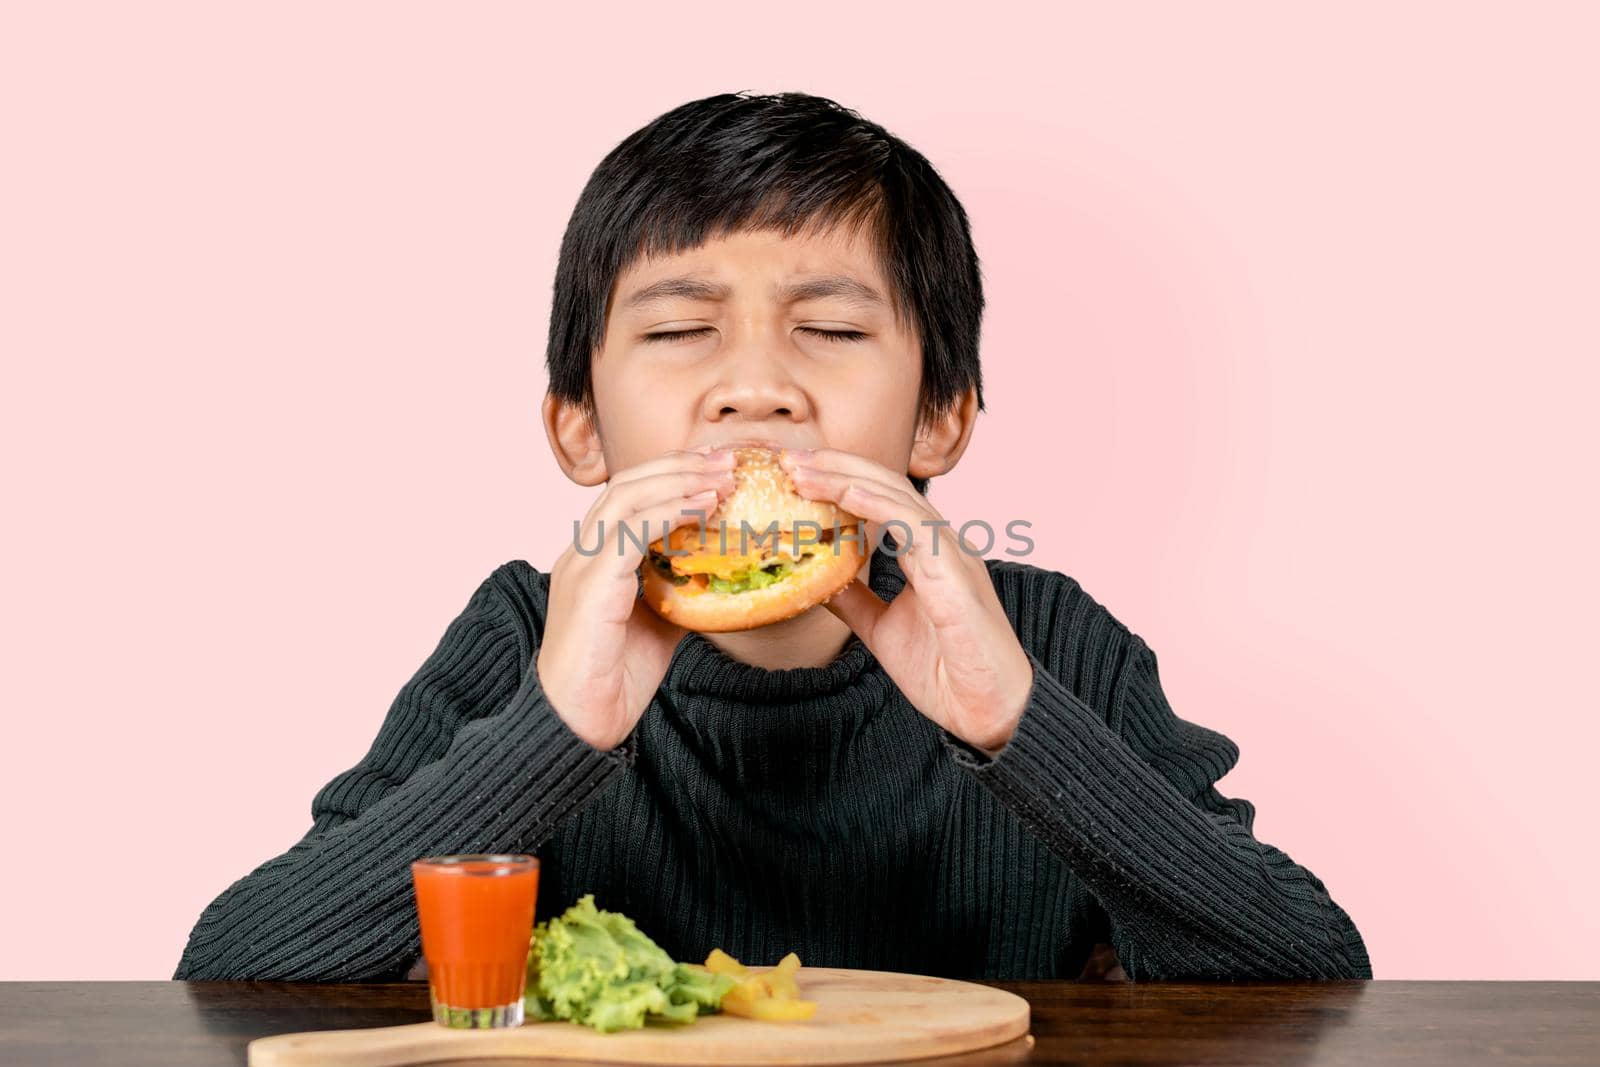 Cute Asian boy eating a delicious hamburger with happiness on pink background.